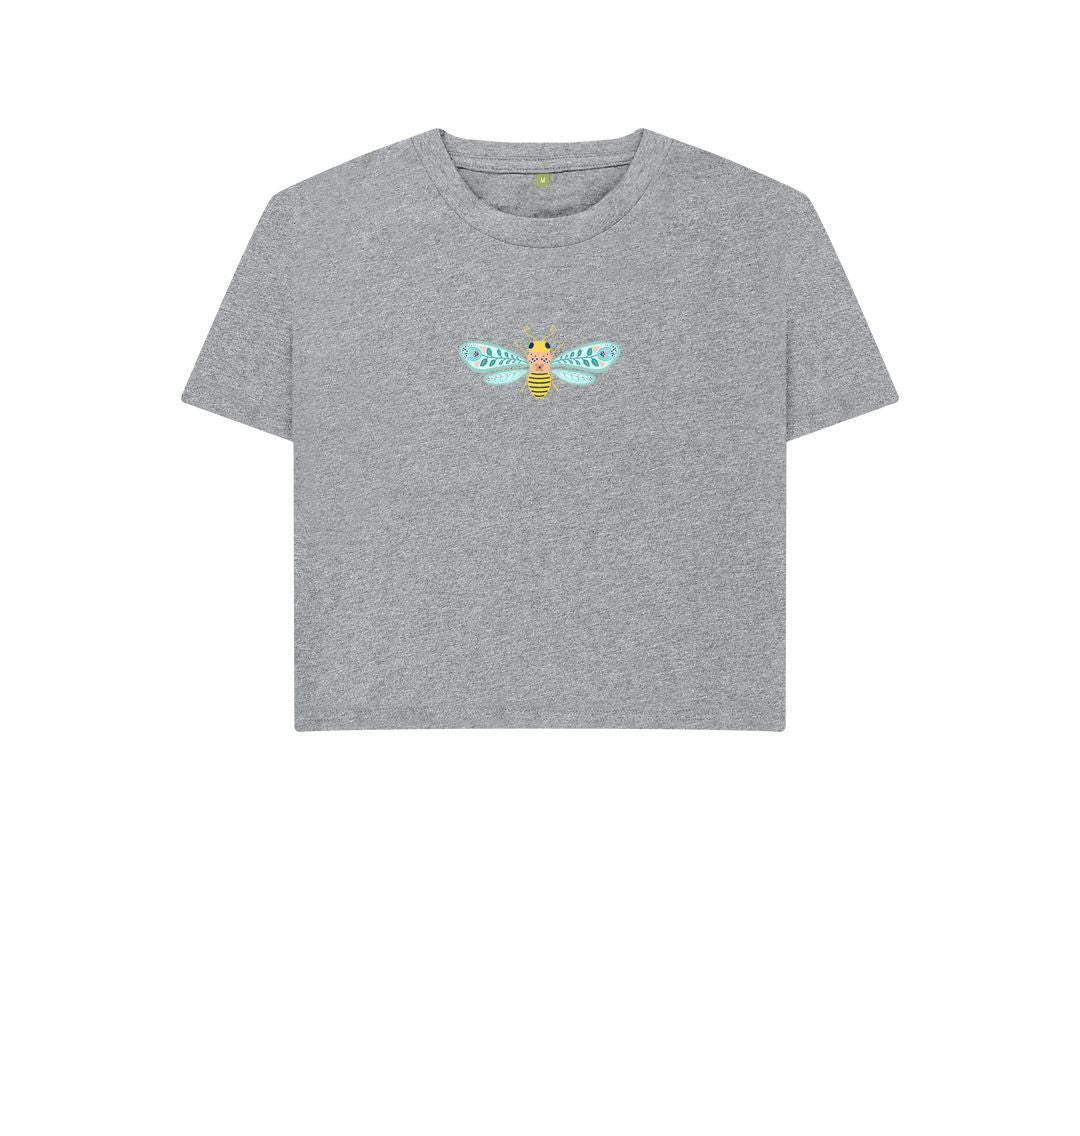 Athletic Grey Boxy Bee T-Shirt (Adult - Gray, White & Dusty Blue)